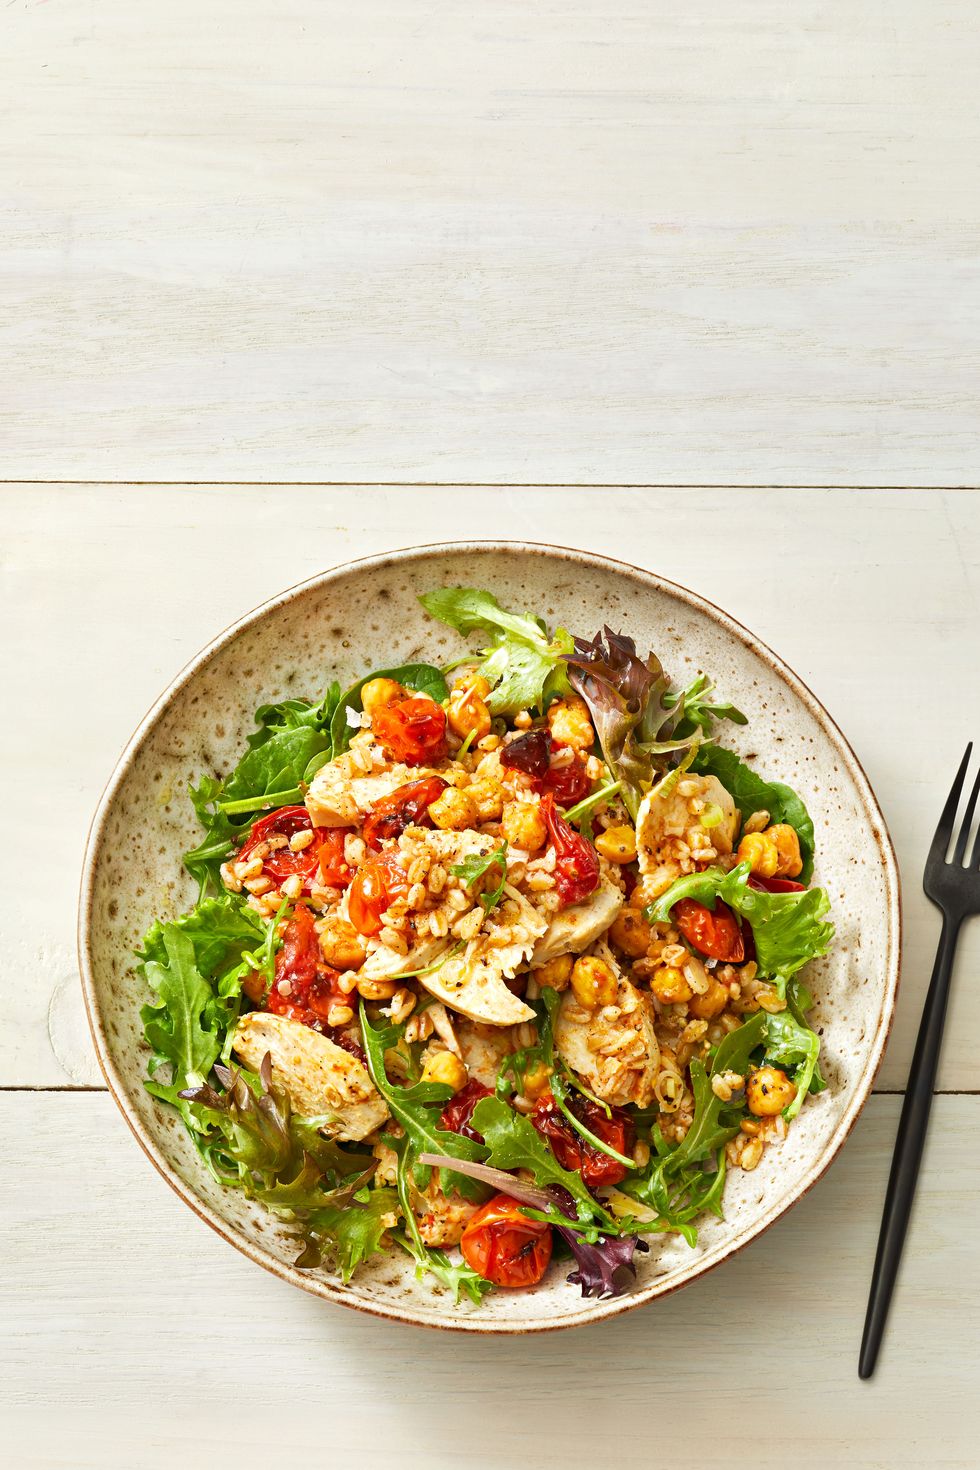 roasted chickpeas, tomatoes and chicken in a bowl with farro and greens